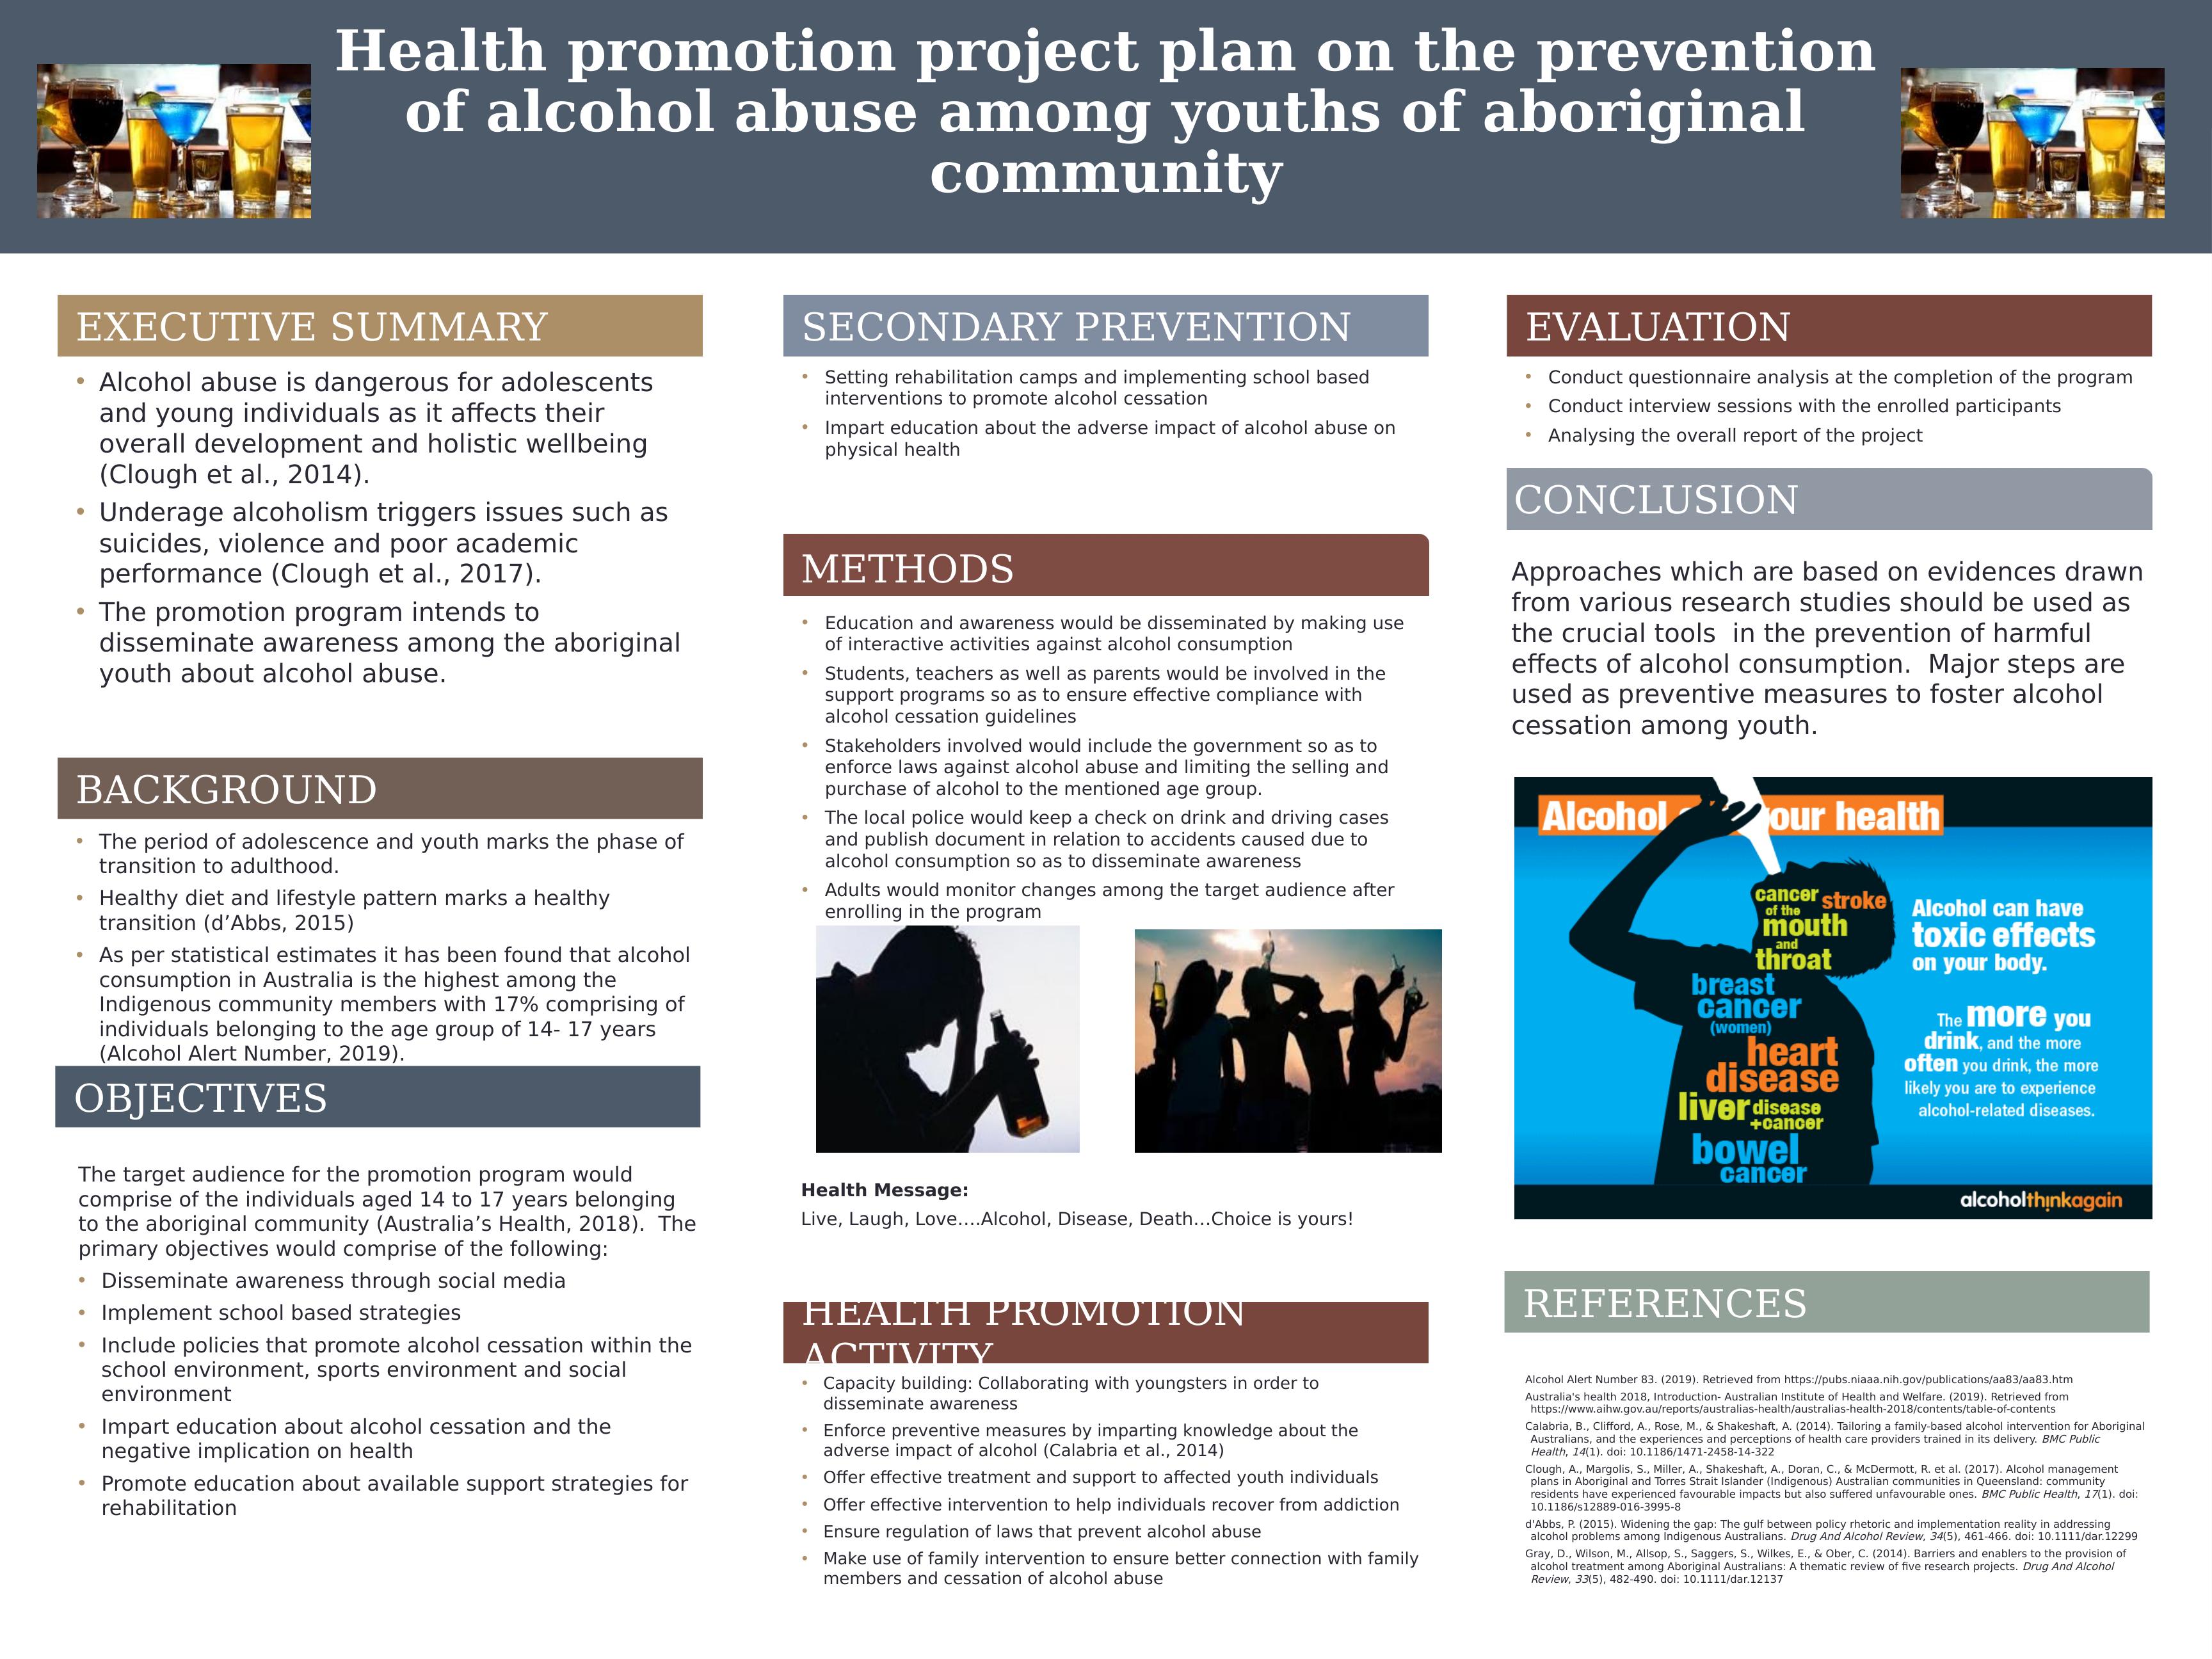 Health Promotion Project Plan on Prevention of Alcohol Abuse Among Aboriginal Youths_1